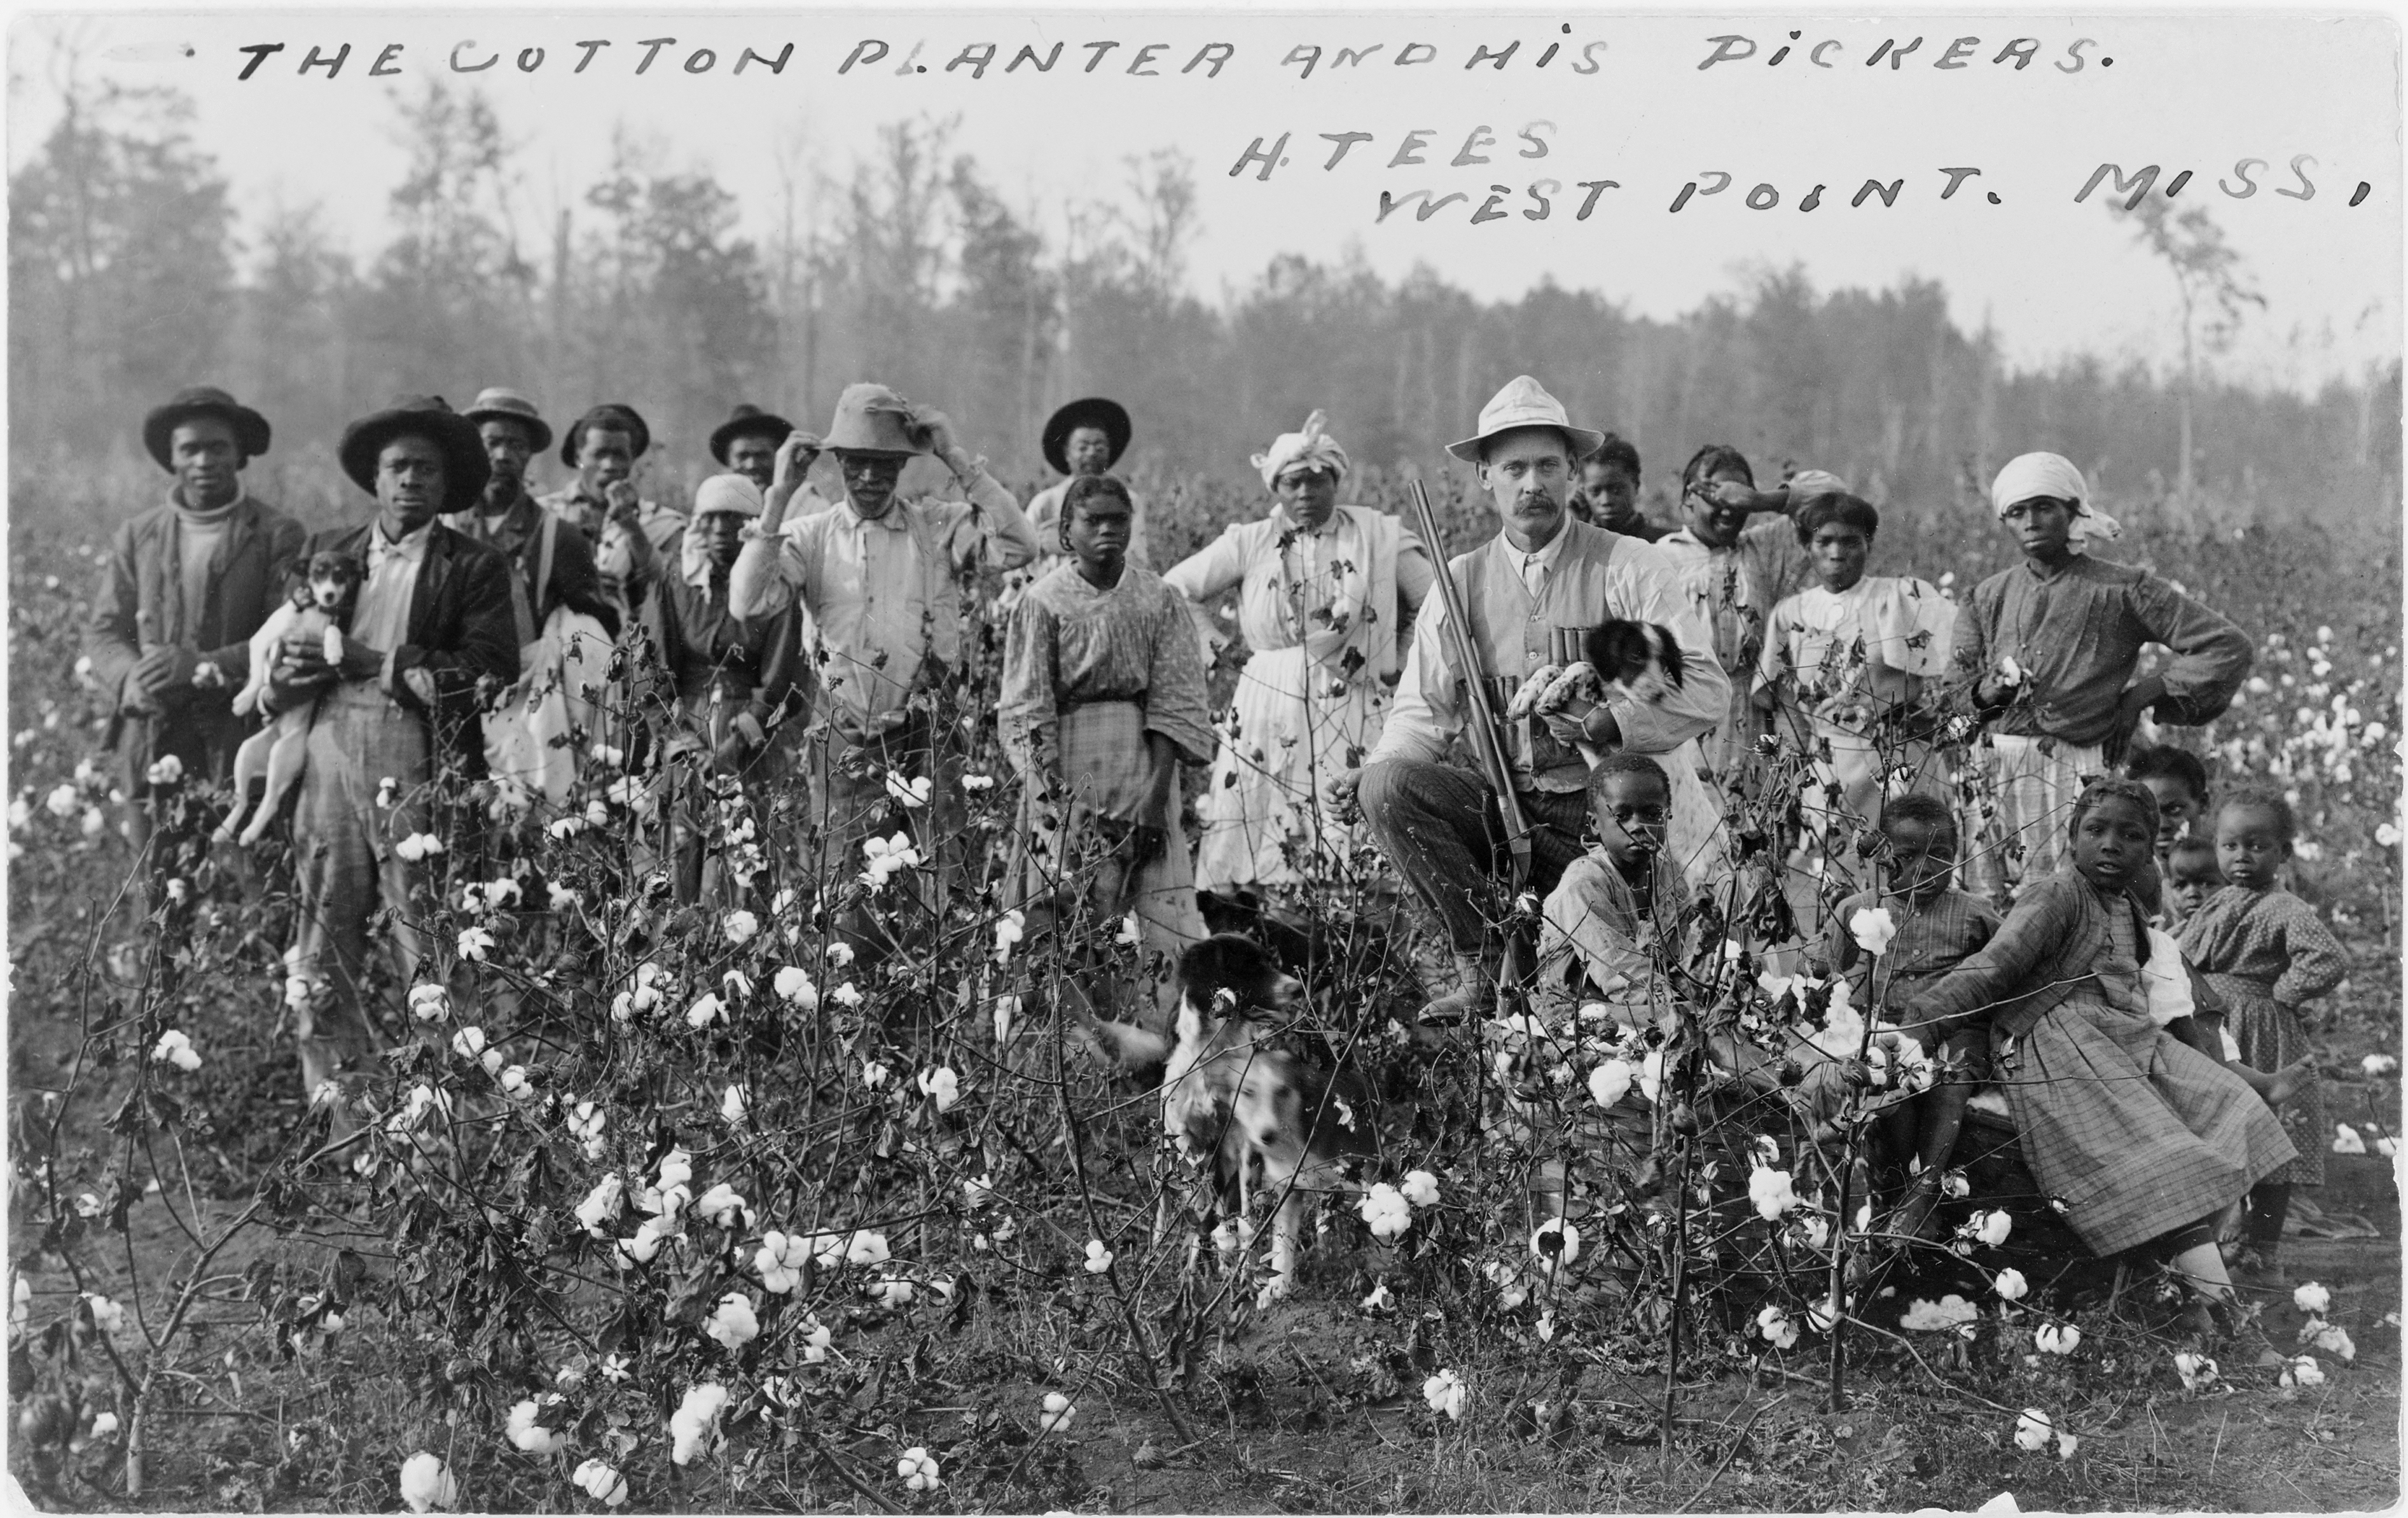 Cotton_planter_and_pickers1908.jpg